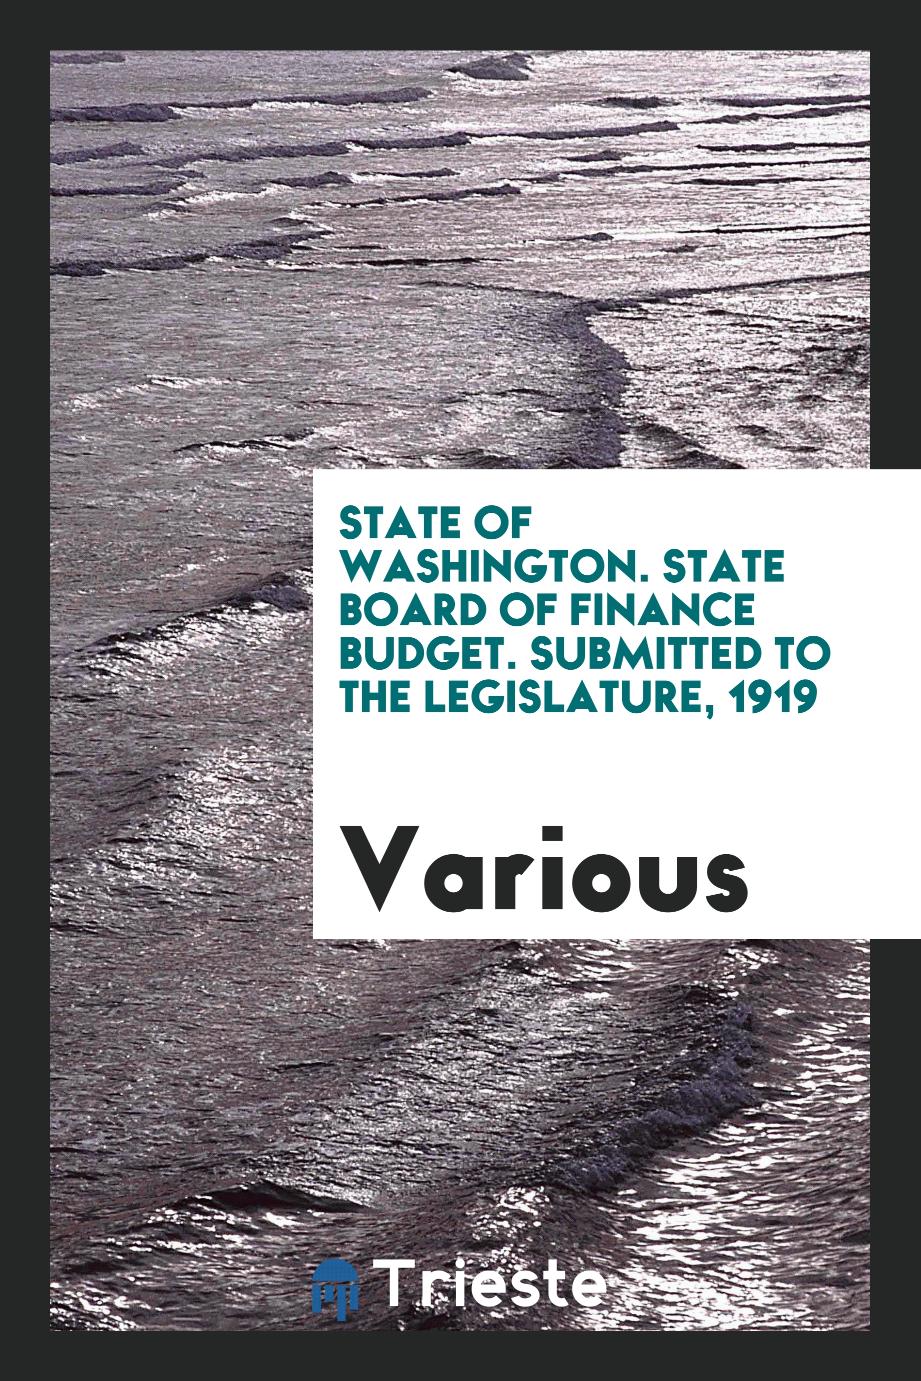 State of Washington. State Board of Finance Budget. Submitted to the Legislature, 1919